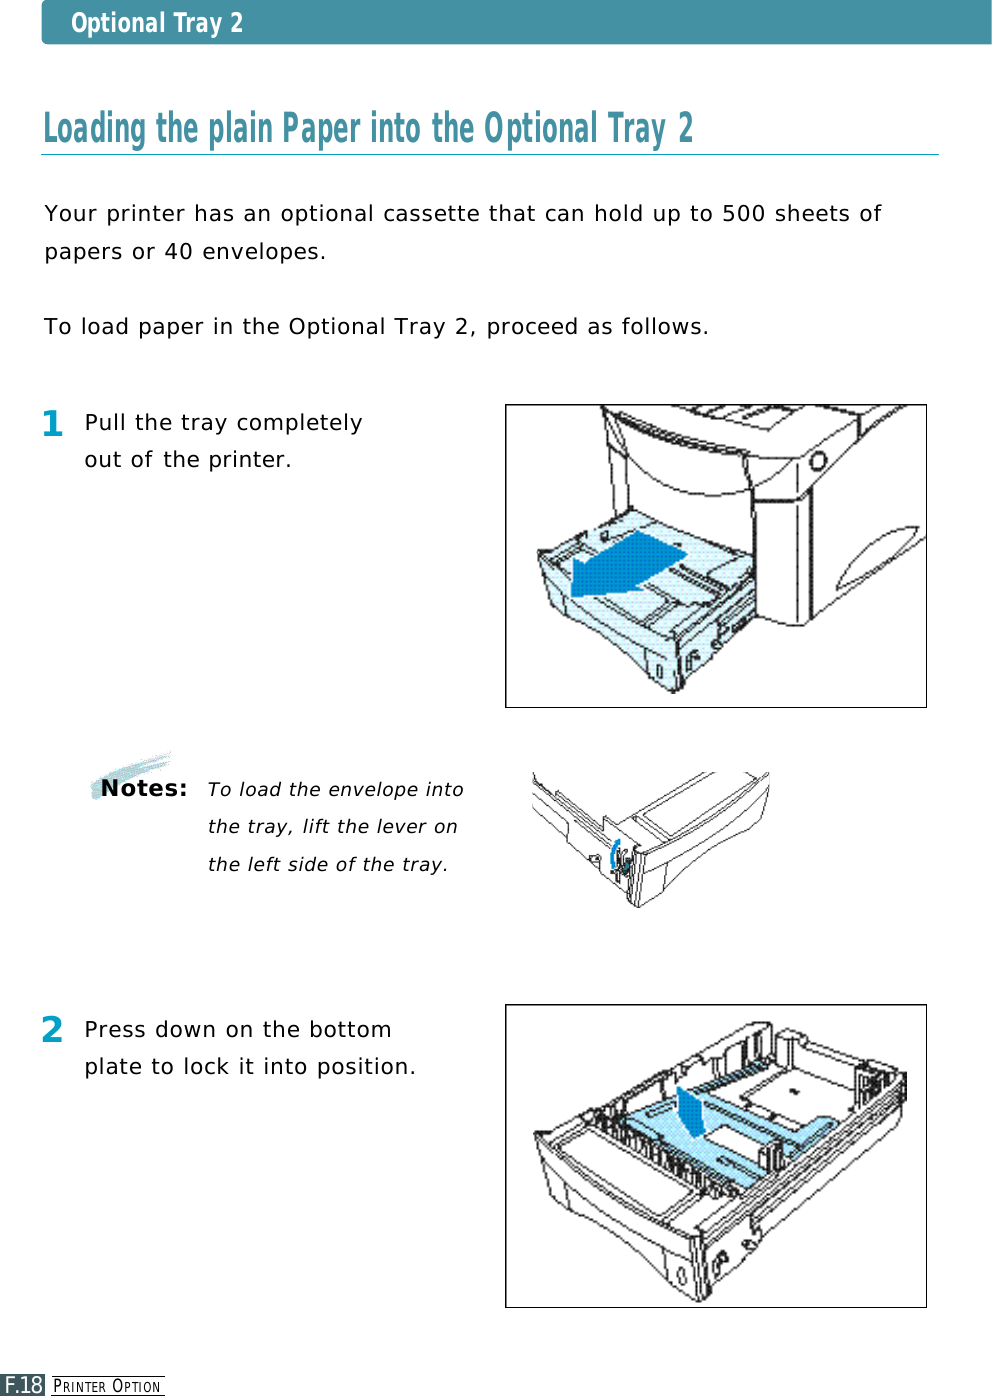 PR I N T E R OP T I O NF.18Optional Tray 2Your printer has an optional cassette that can hold up to 500 sheets of papers or 40 enve l o p e s .To load paper in the Optional Tray 2, proceed as follows.1Pull the tray completely out of the printer.2Press down on the bottomplate to lock it into position.Notes:  To load the envelope intothe tray, lift the lever onthe left side of the tray.Loading the plain Paper into the Optional Tray 2